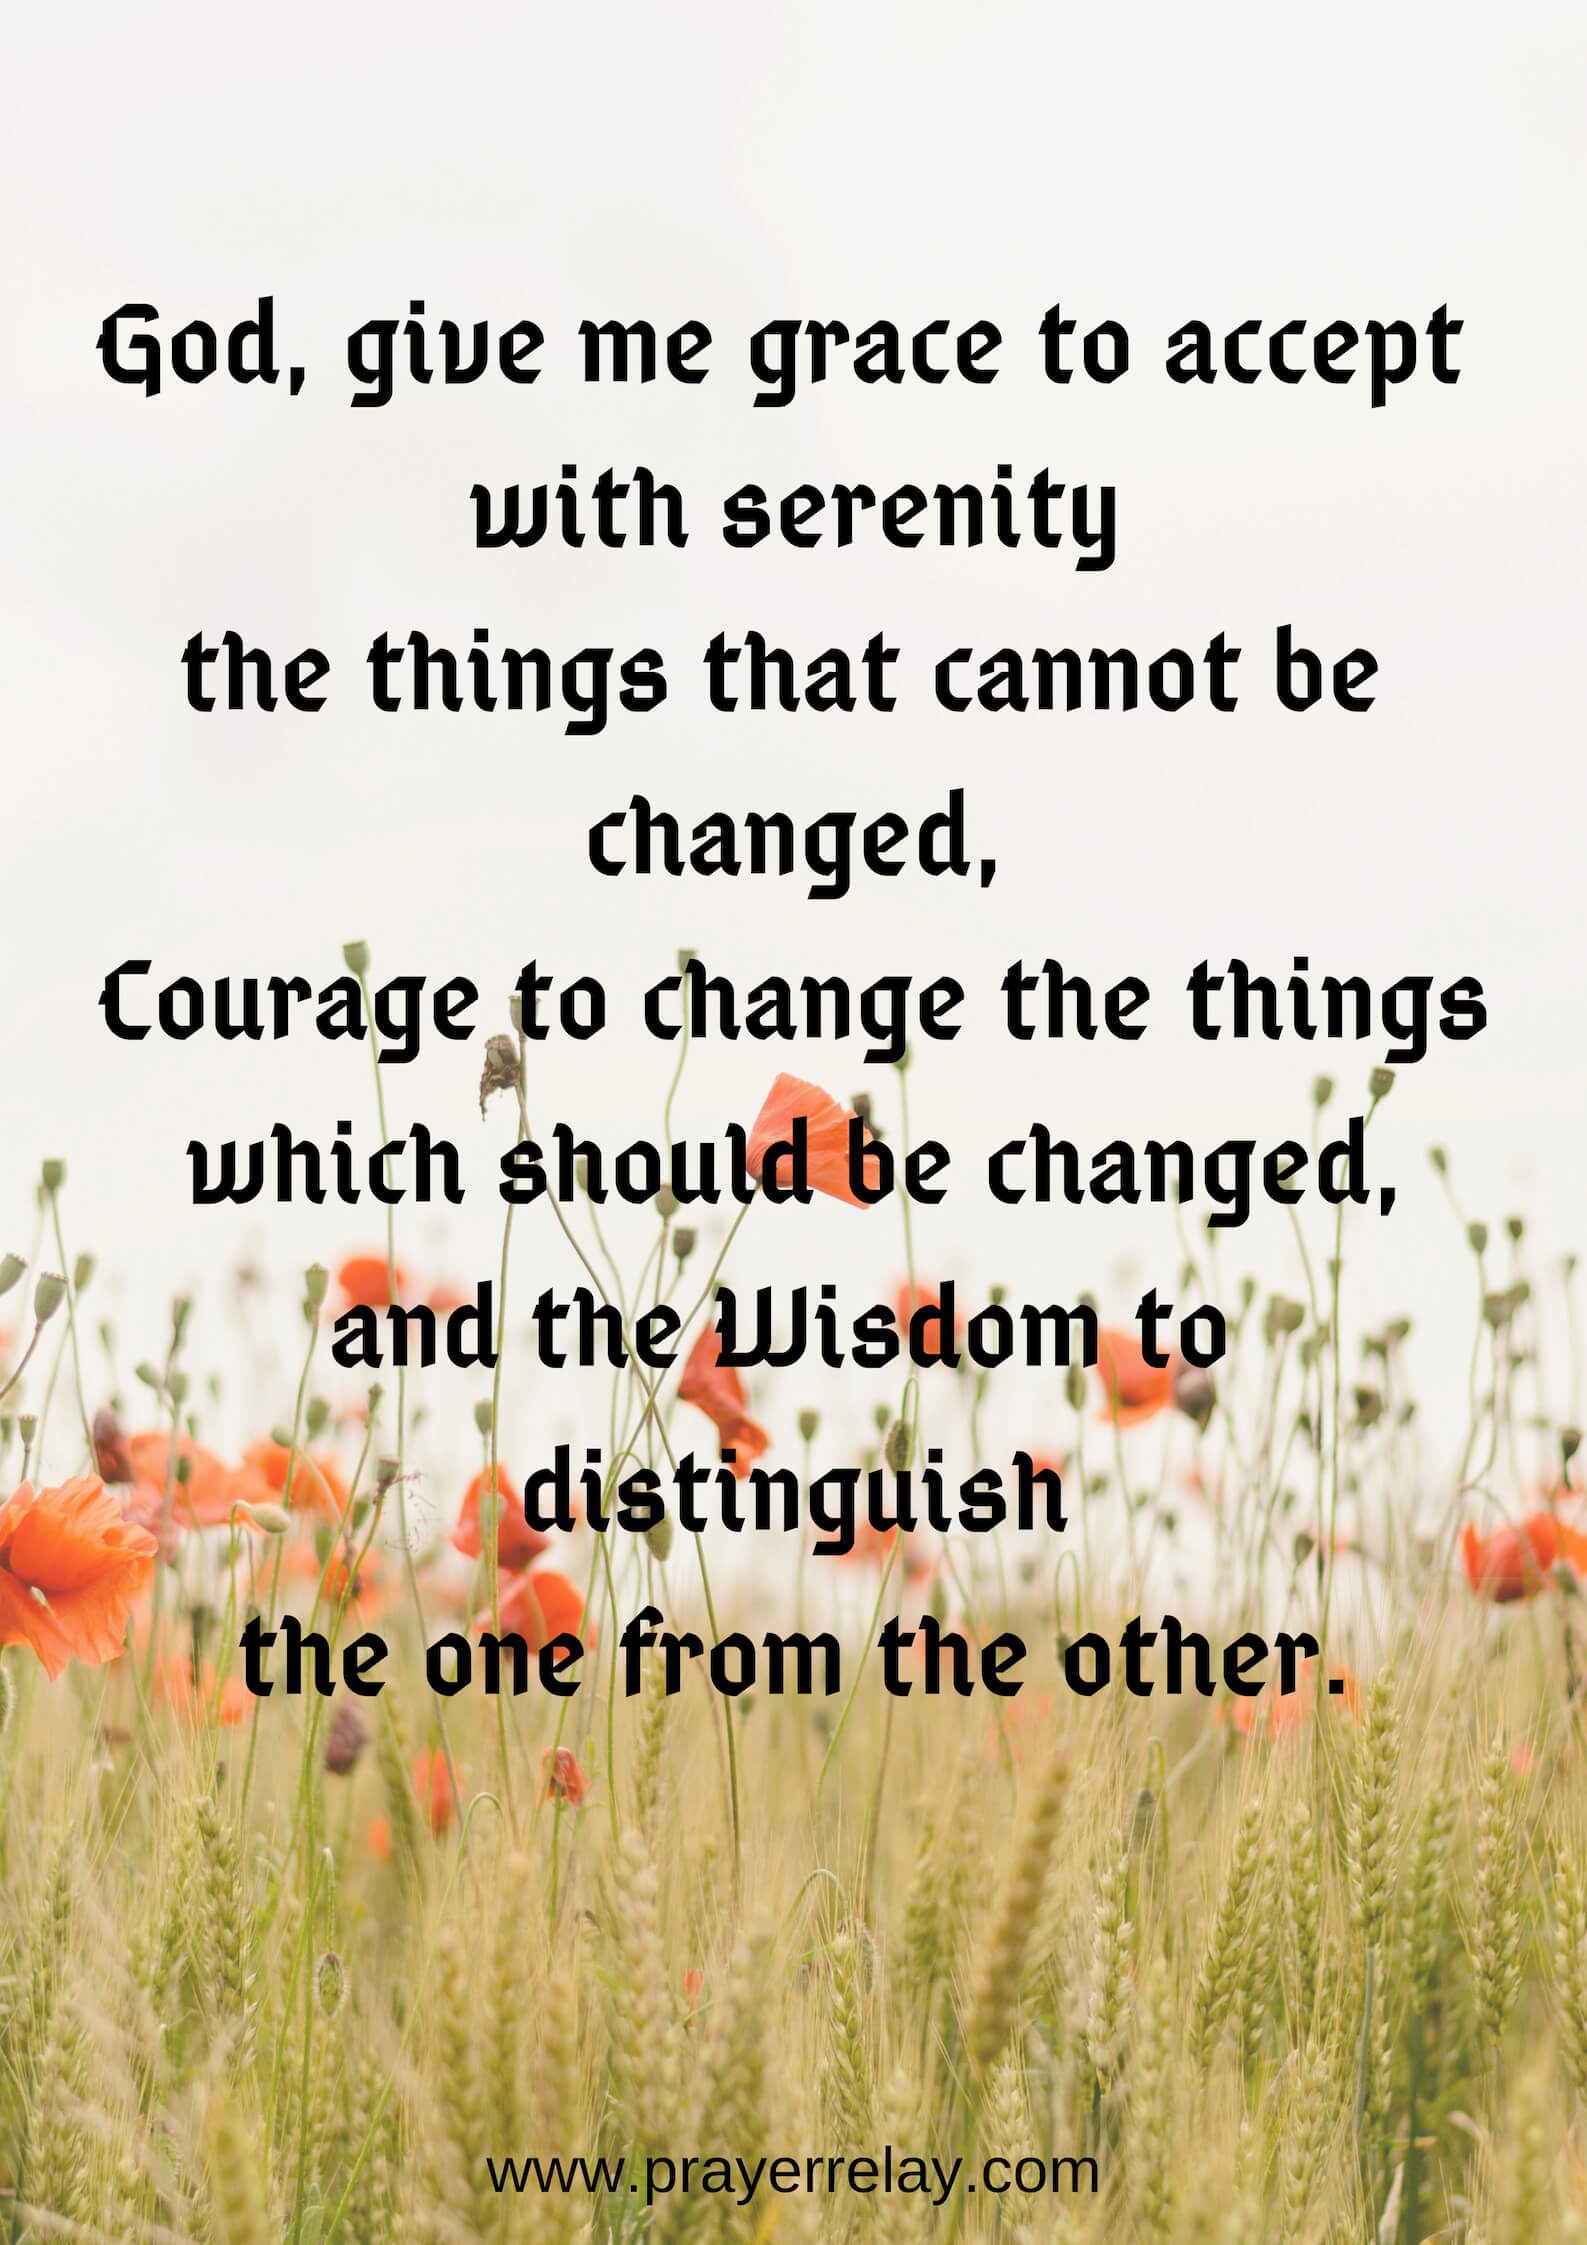 the-serenity-prayer-ultimate-guide-1-the-prayer-relay-movement